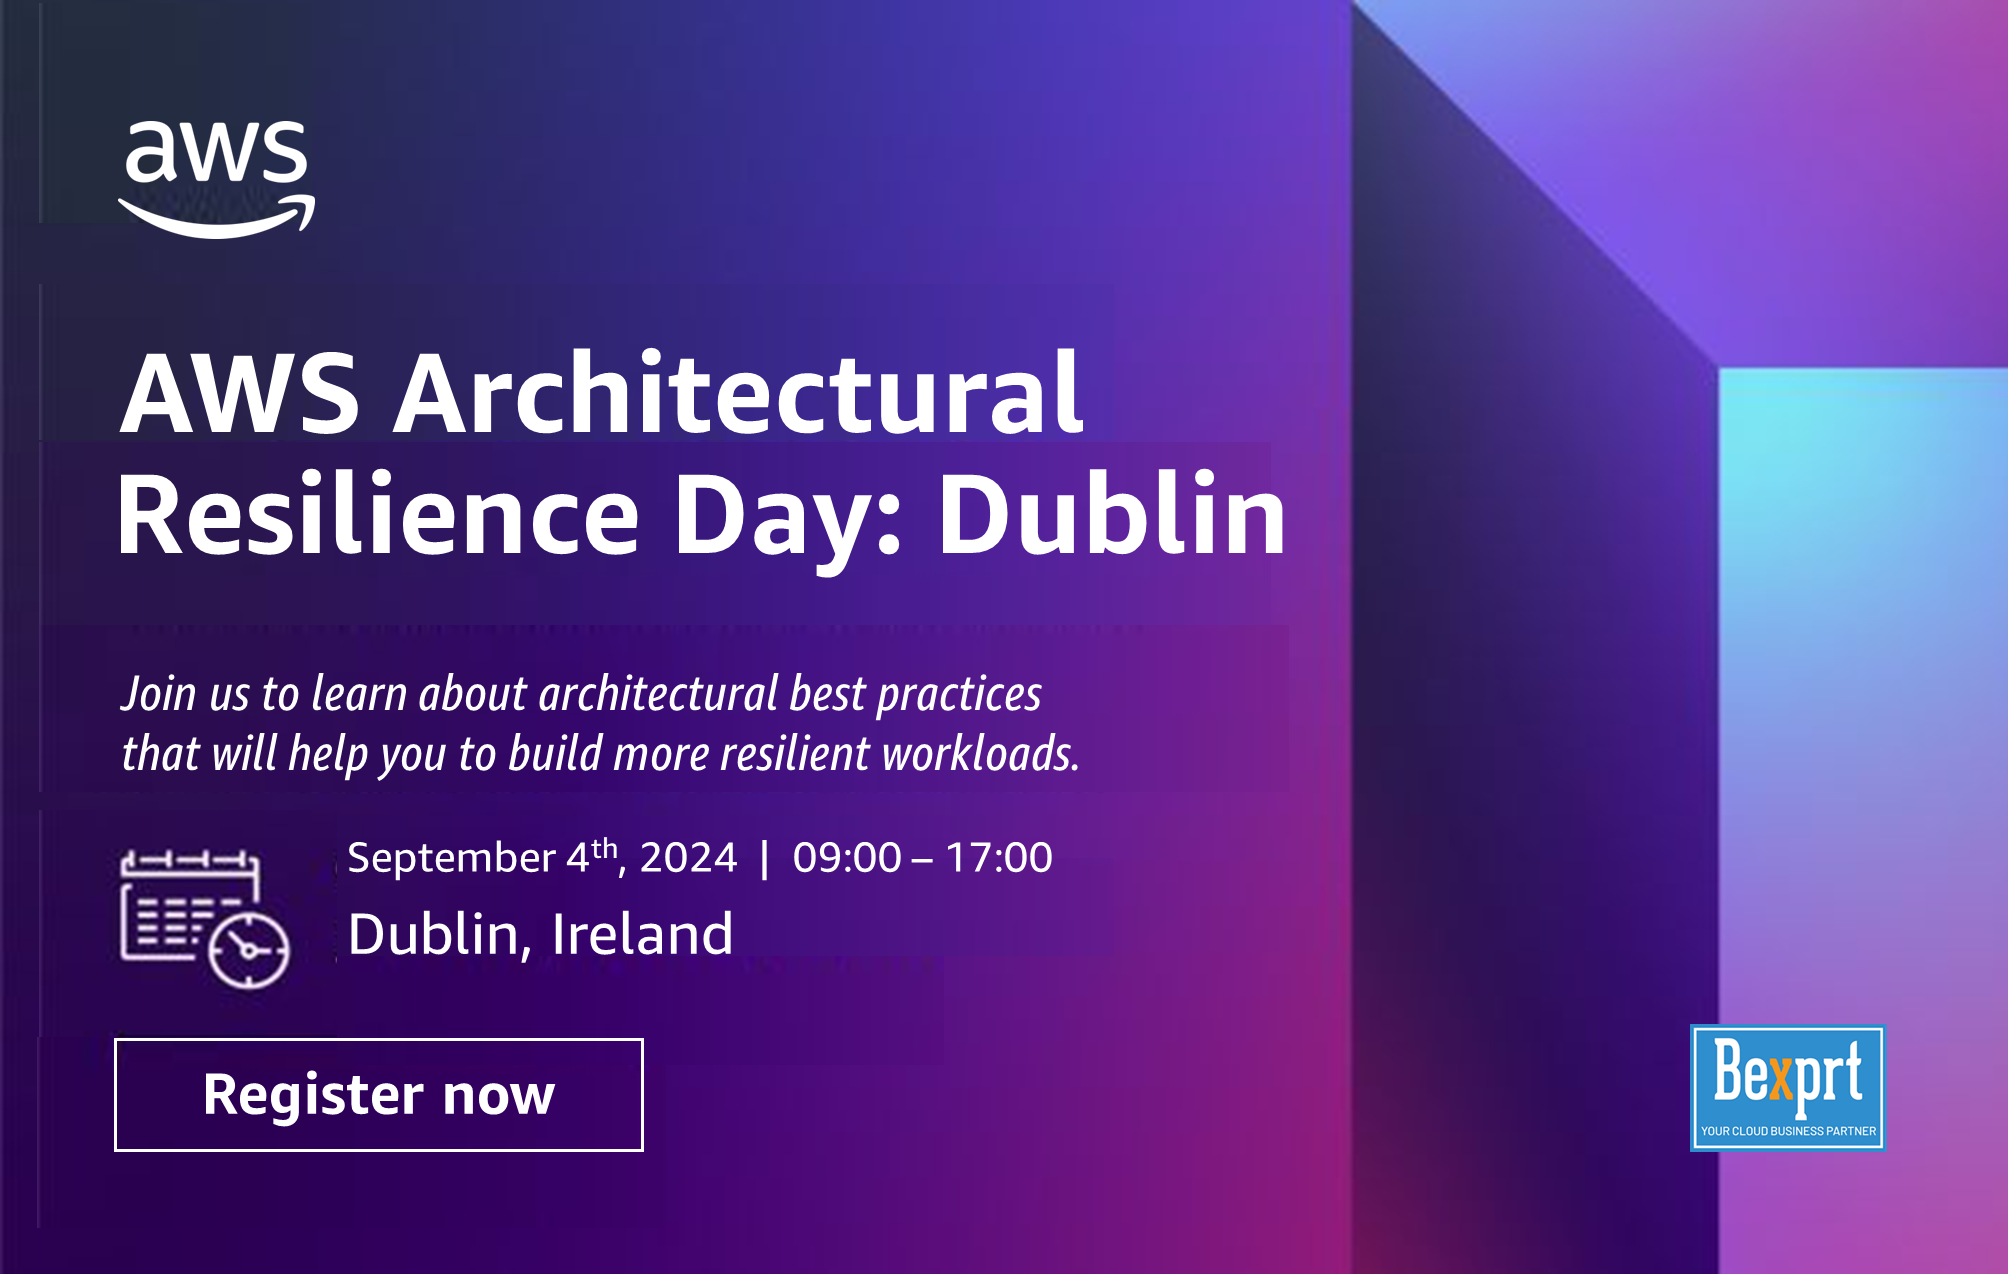 AWS Architectural Resilience Day, 4th September 2024